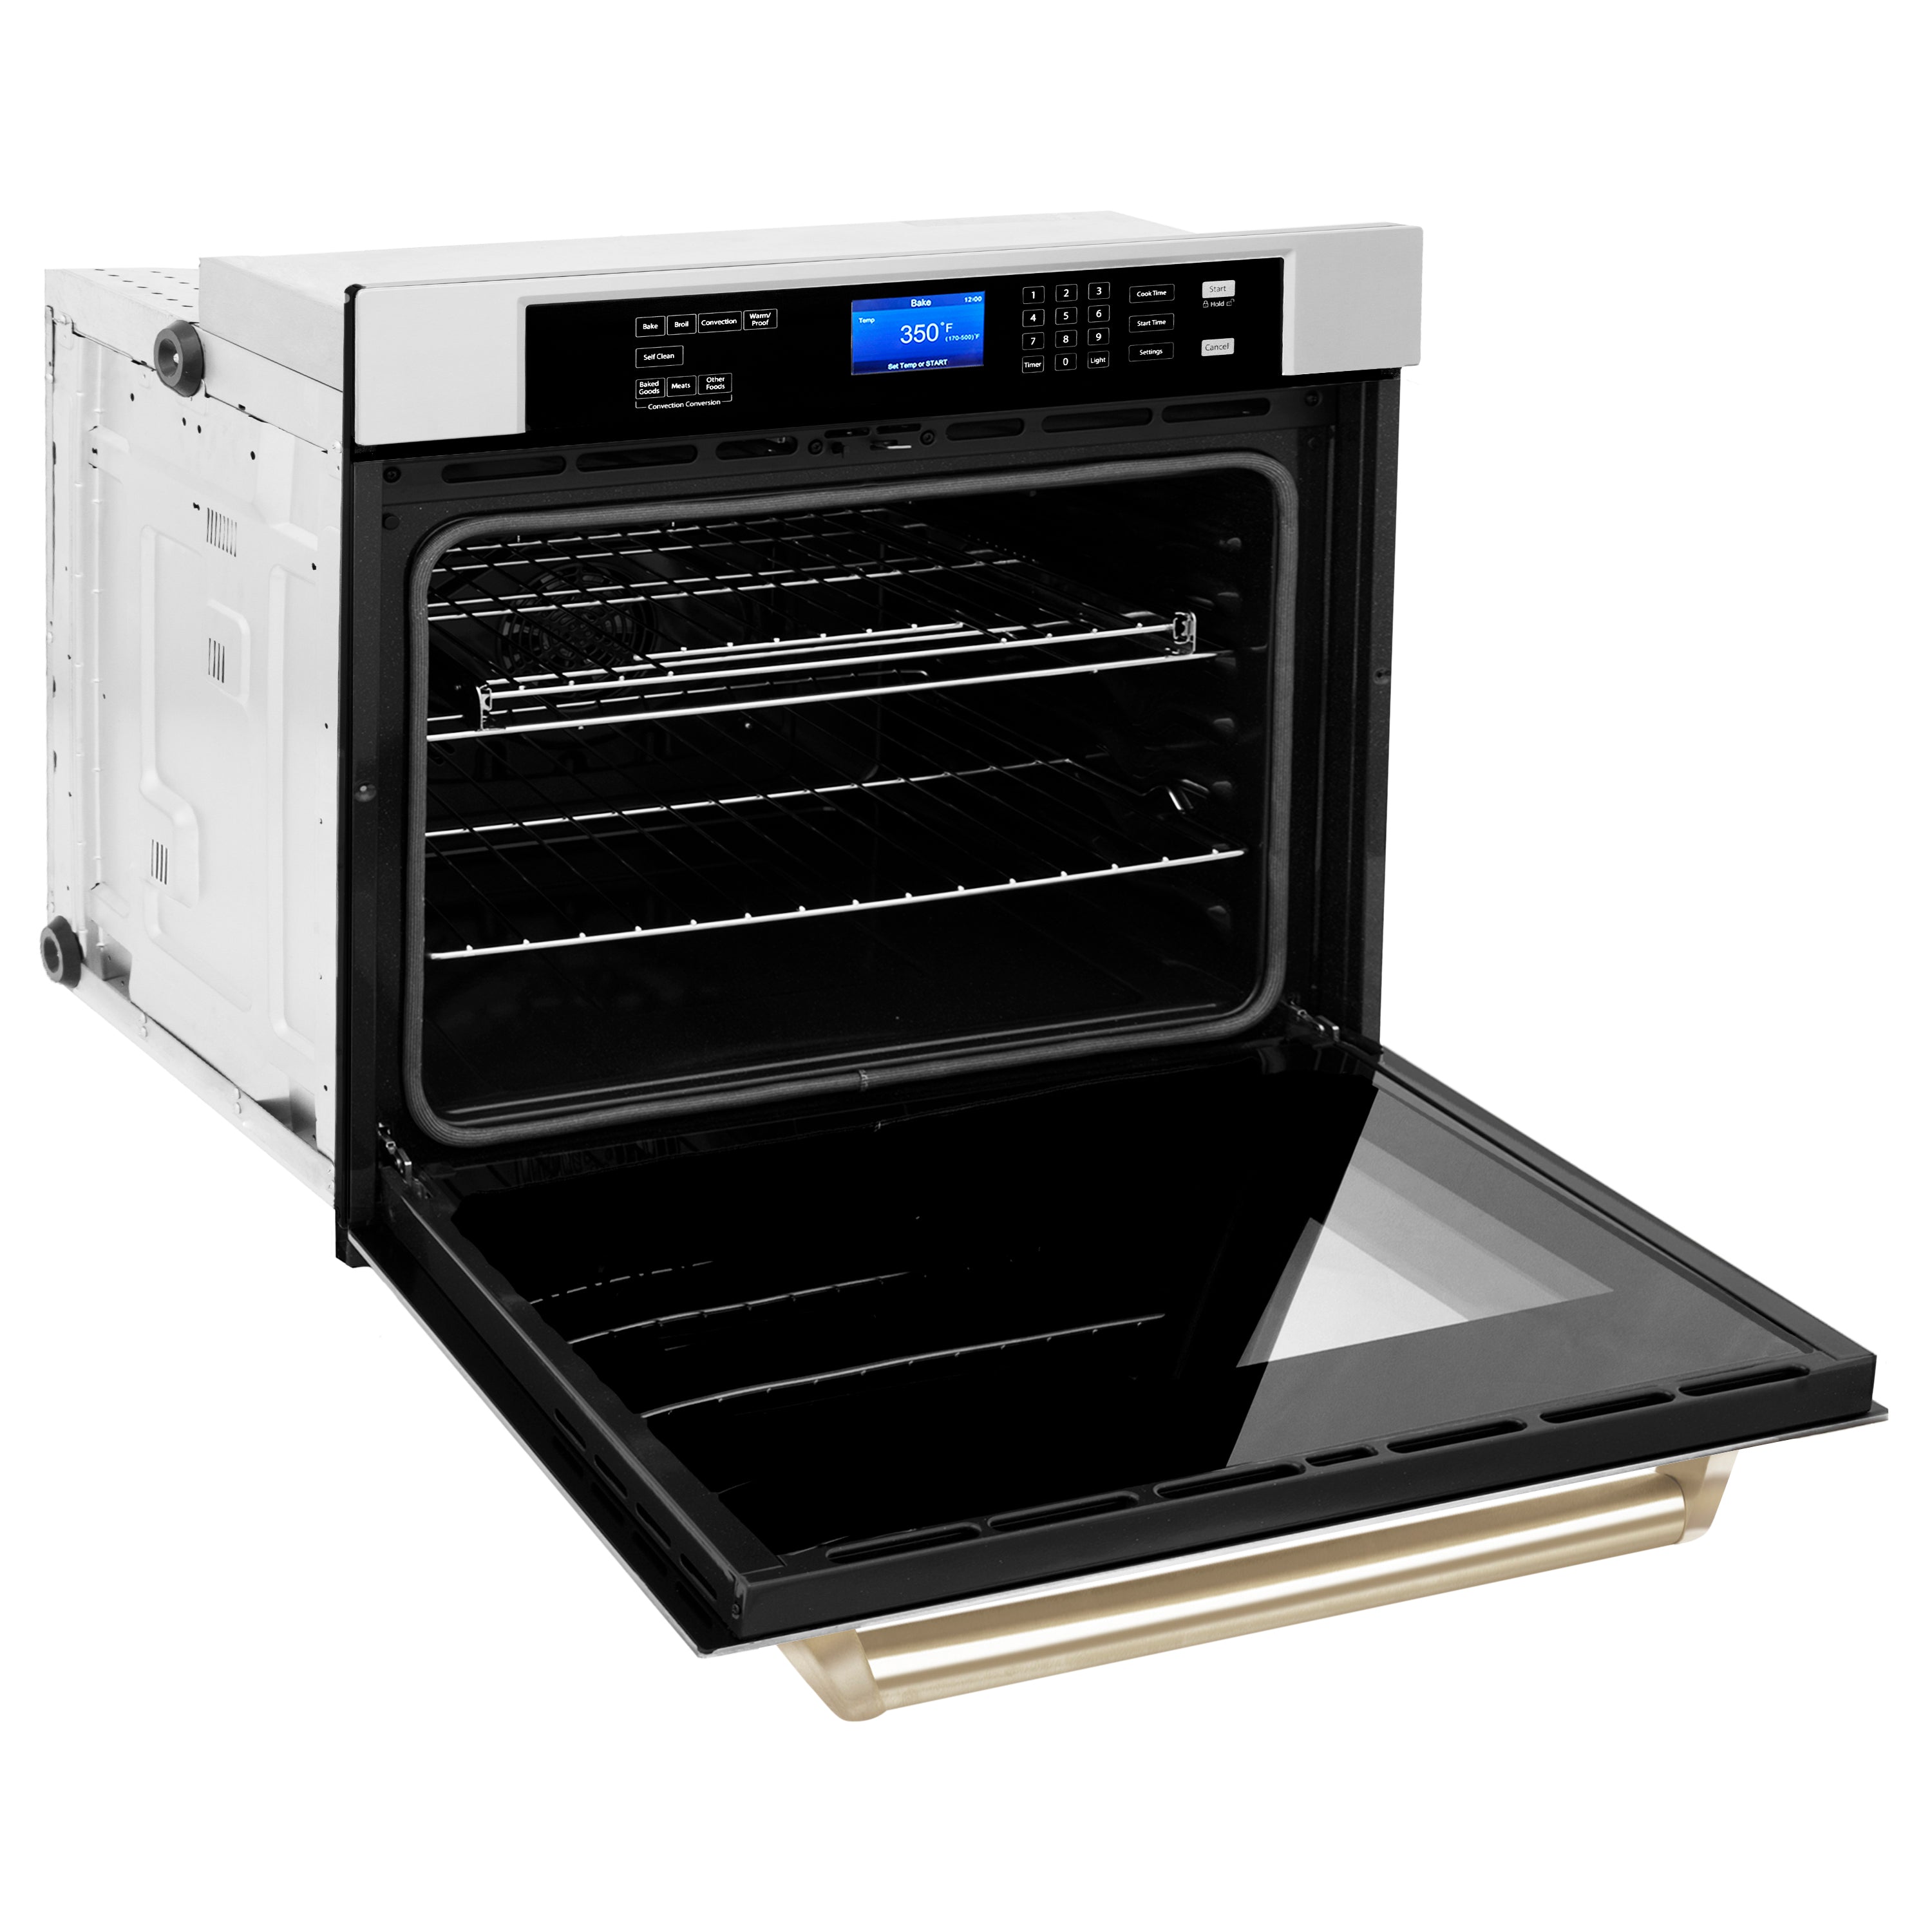 ZLINE 30" Autograph Edition Single Wall Oven with Self Clean and True Convection in Stainless Steel and Polished Gold (AWSZ-30-G)